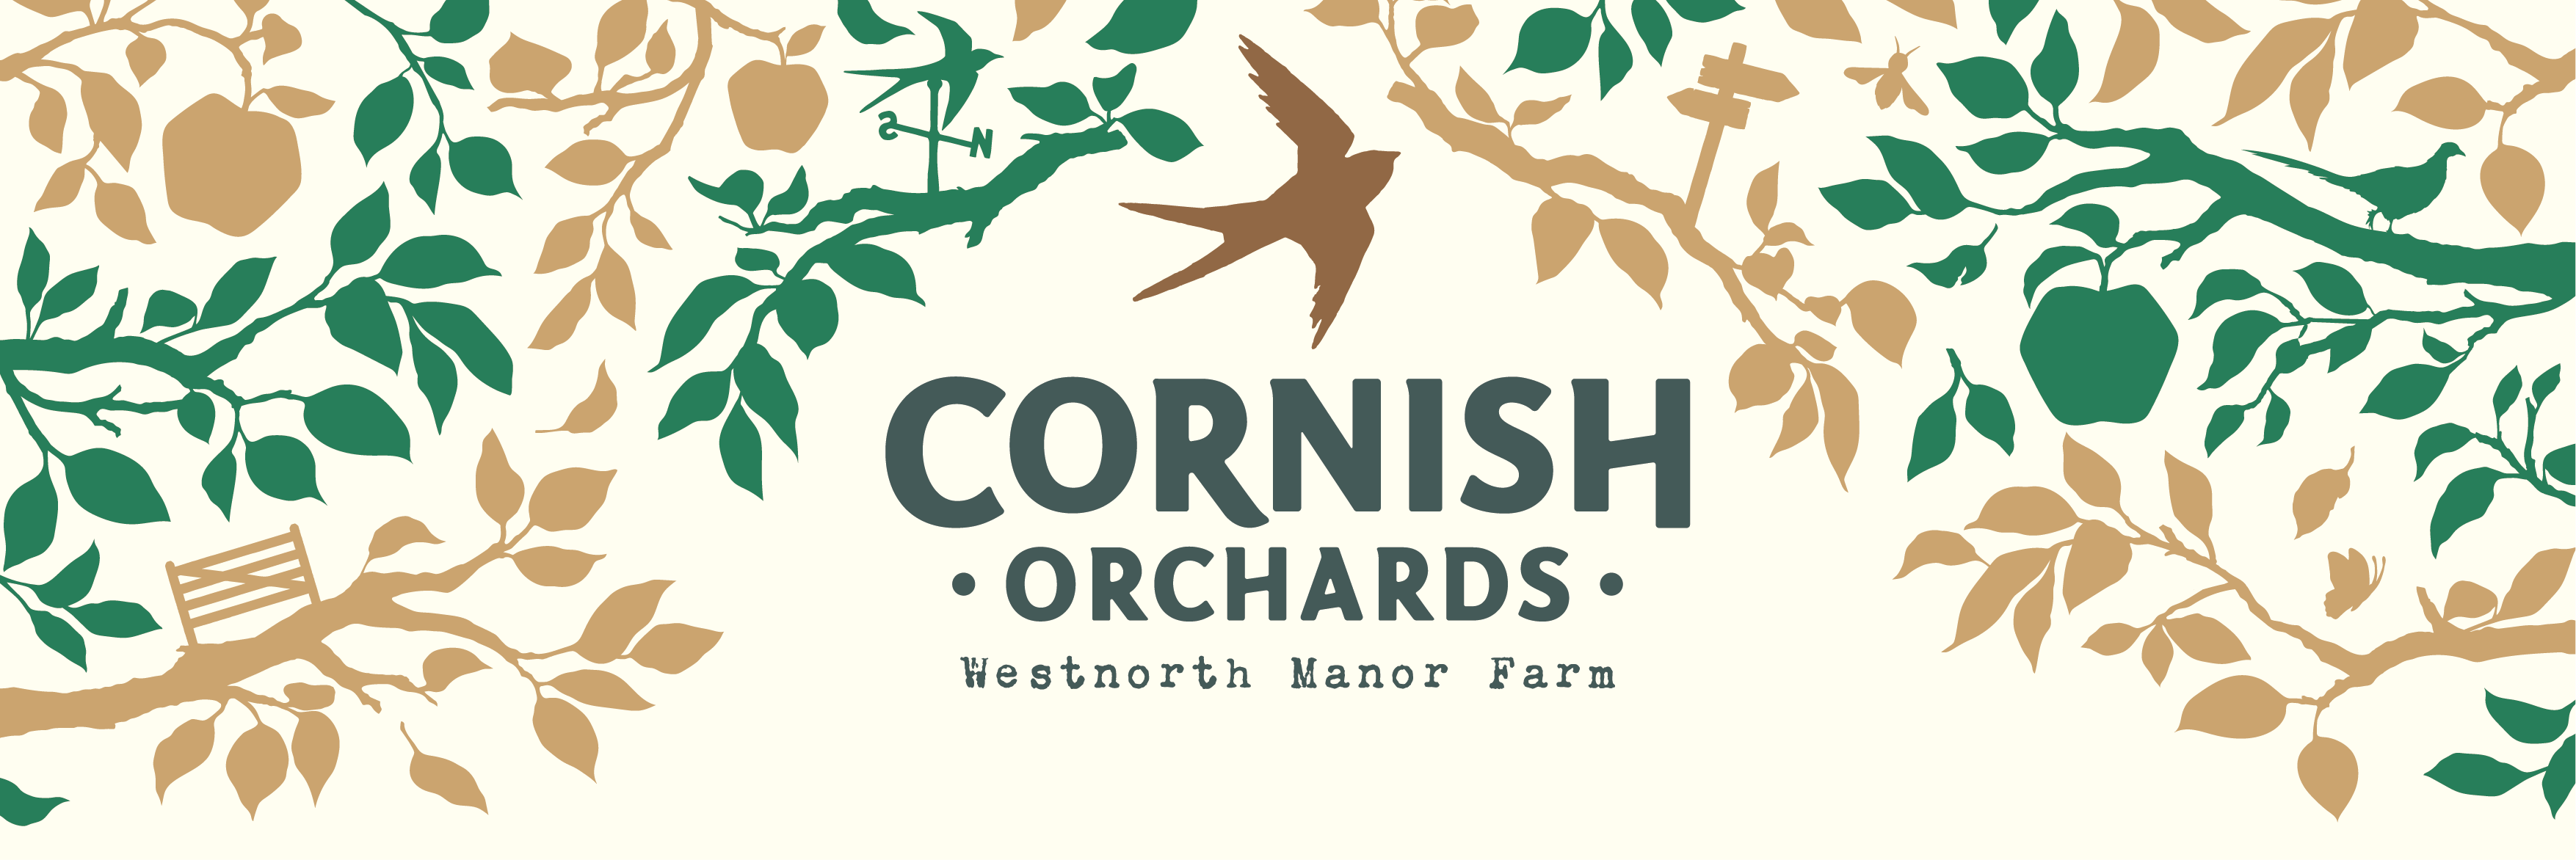 Cornish Orchards 5s Inspection